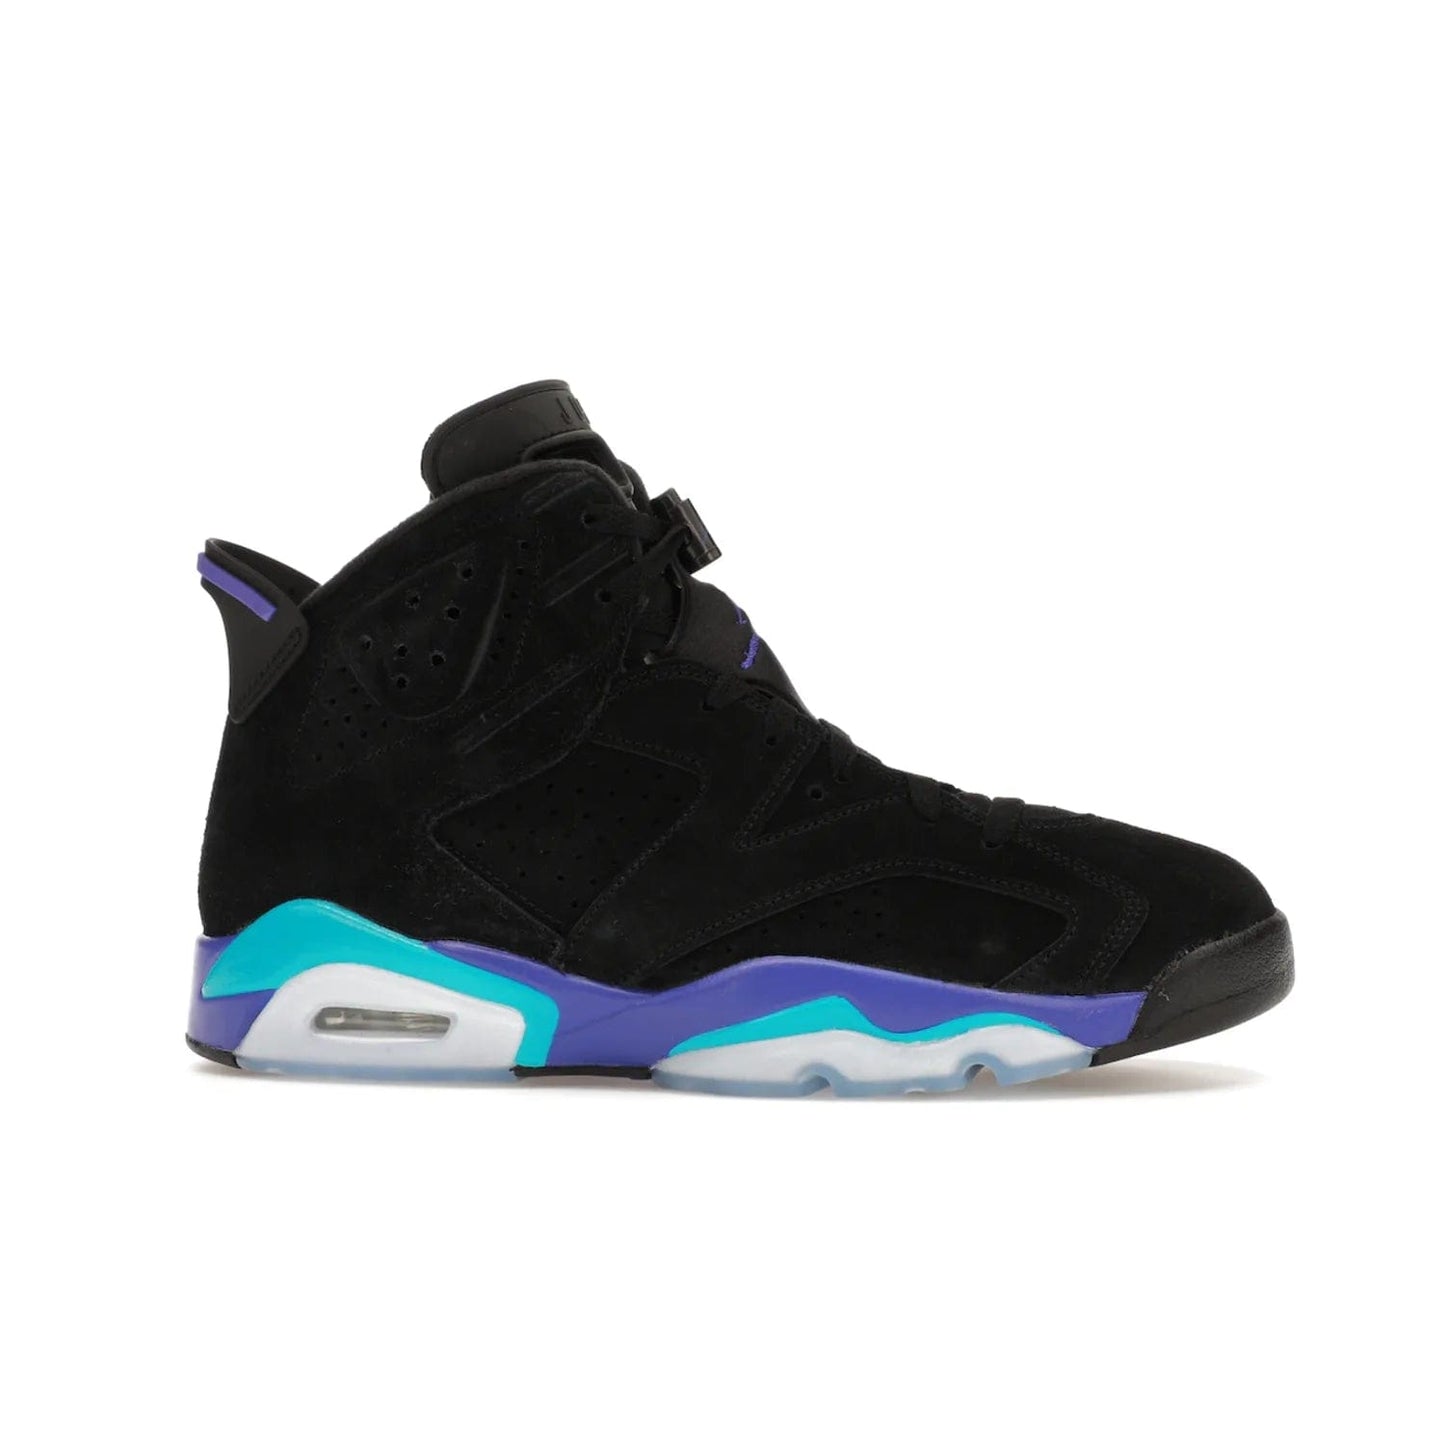 Jordan 6 Retro Aqua - Image 2 - Only at www.BallersClubKickz.com - Feel the classic Jordan 6 Retro Aqua paired with modern style. Black, Bright Concord, and Aquatone hues are crafted with a supple suede and rubberized heel tab. This standout sneaker adds signature Jordan elements at $200. Elevate your style with the Jordan 6 Retro Aqua.